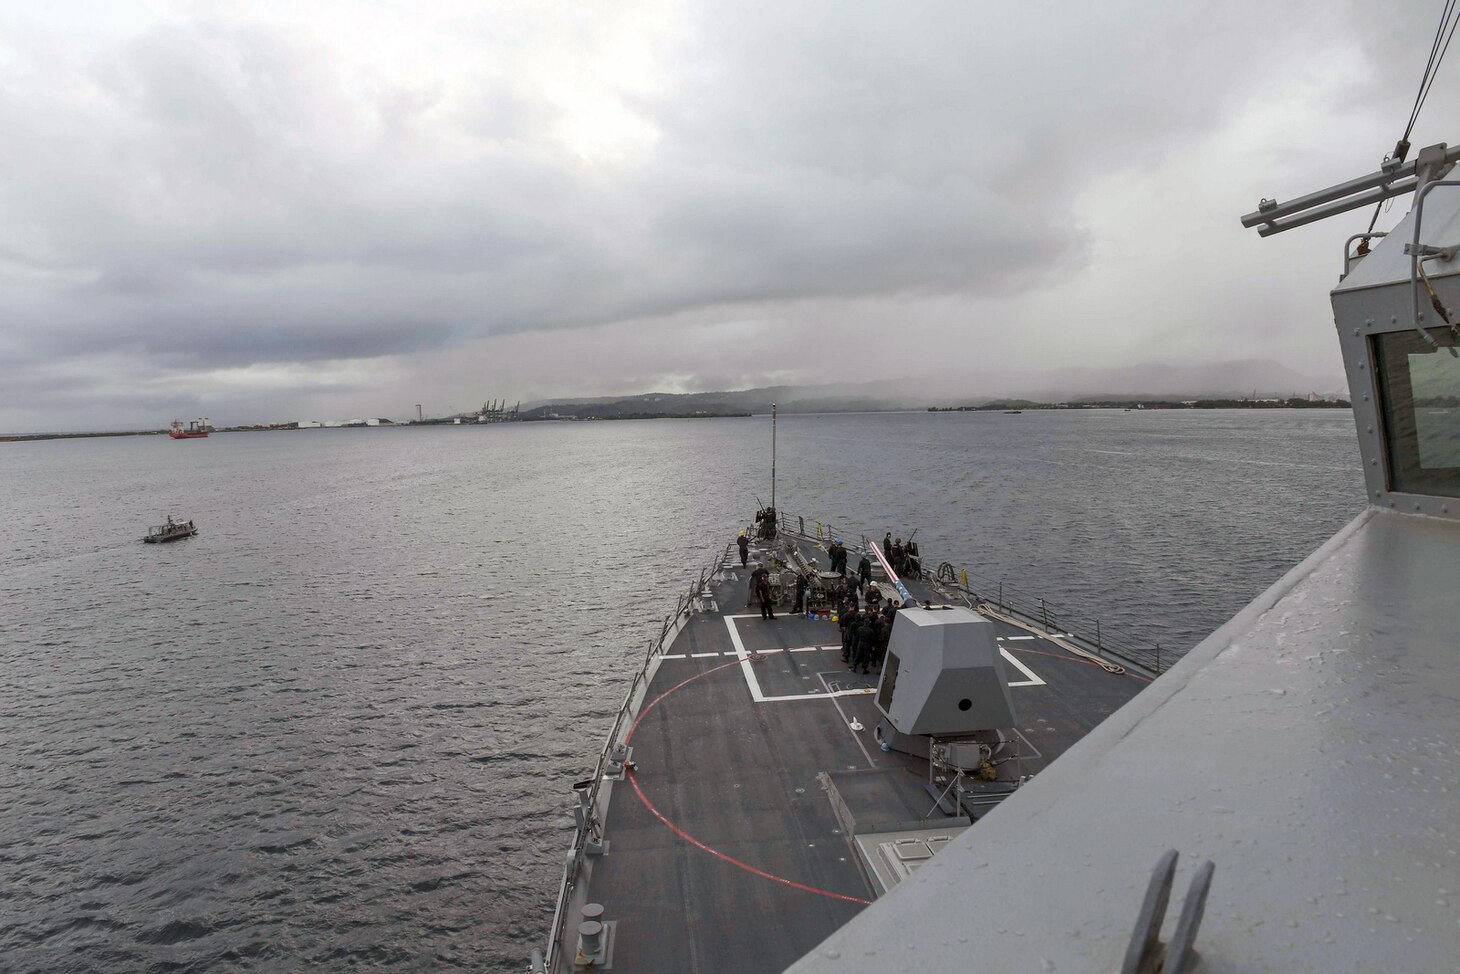 Arleigh Burke-class guided-missile destroyer USS Wayne E. Meyer (DDG 108) prepares to pull into Naval Base Guam, Feb. 3, 2017. Wayne E. Meyer is on a regularly scheduled Western Pacific deployment with the Carl Vinson Carrier Strike Group as part of the U.S. Pacific Fleet-led initiative to extend the command and control functions of U.S. 3rd Fleet into the Indo-Asia-Pacific region. U.S. Navy aircraft carrier strike groups have patrolled the Indo-Asia-Pacific regularly and routinely for more than 70 years.